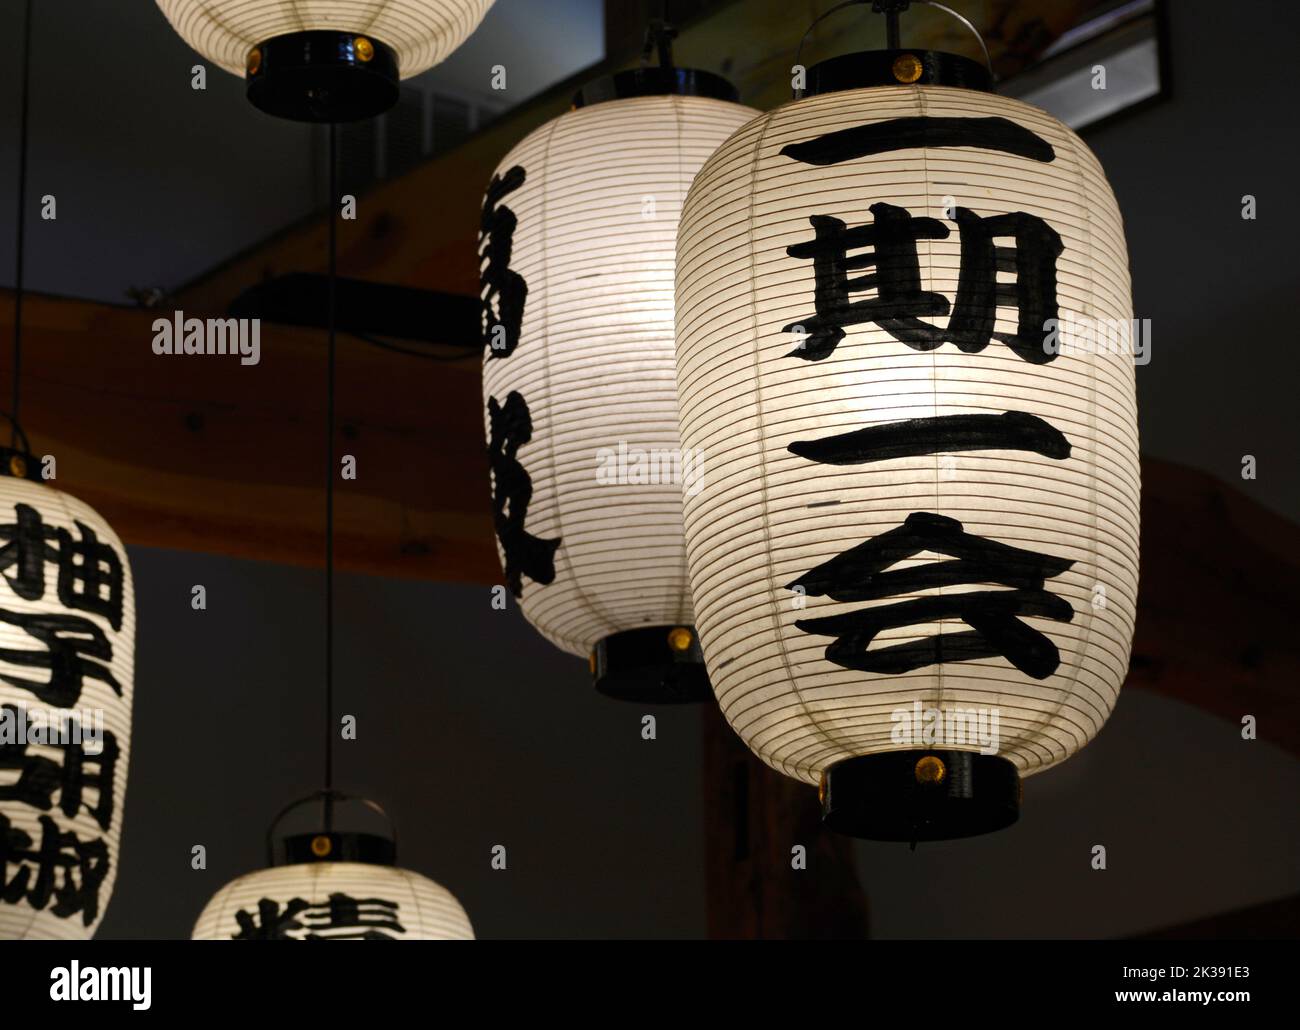 A Japanese four-character idiom, 'Ichi-go ichi-e', on lanterns in a Japanese restaurant that describe a cultural concept (see additional information). Stock Photo